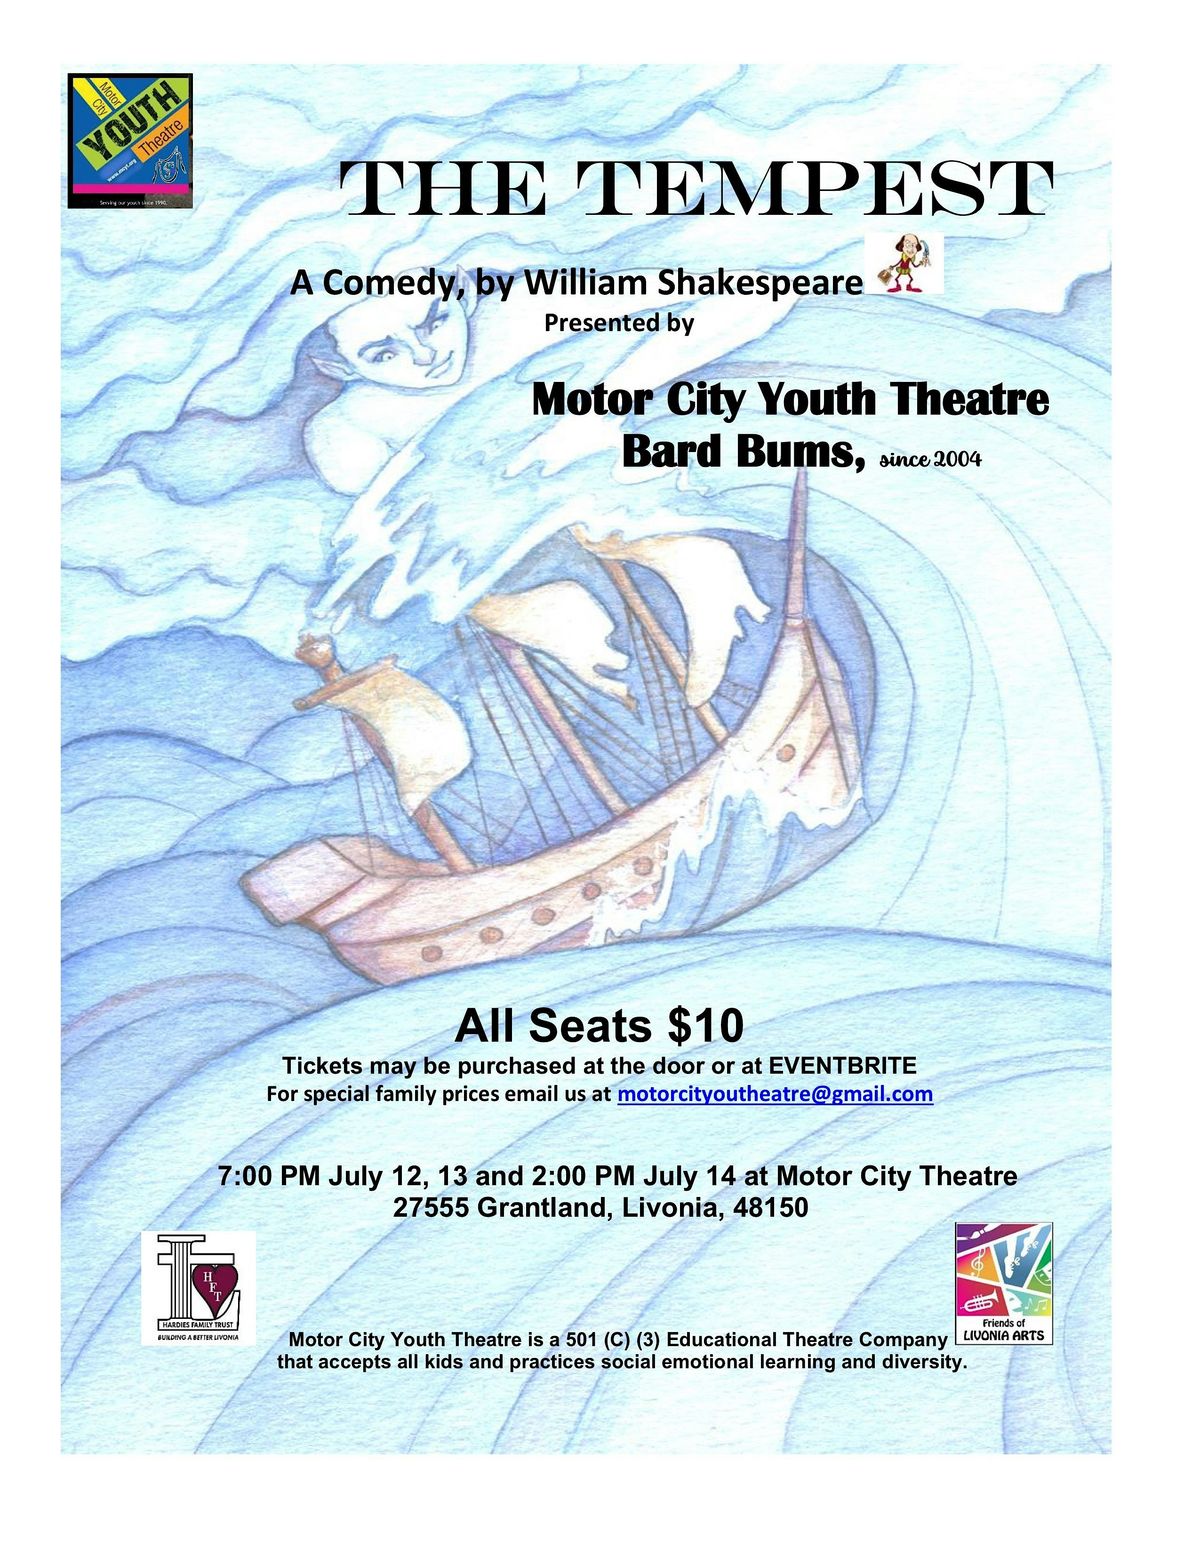 The Tempest, A Comedy